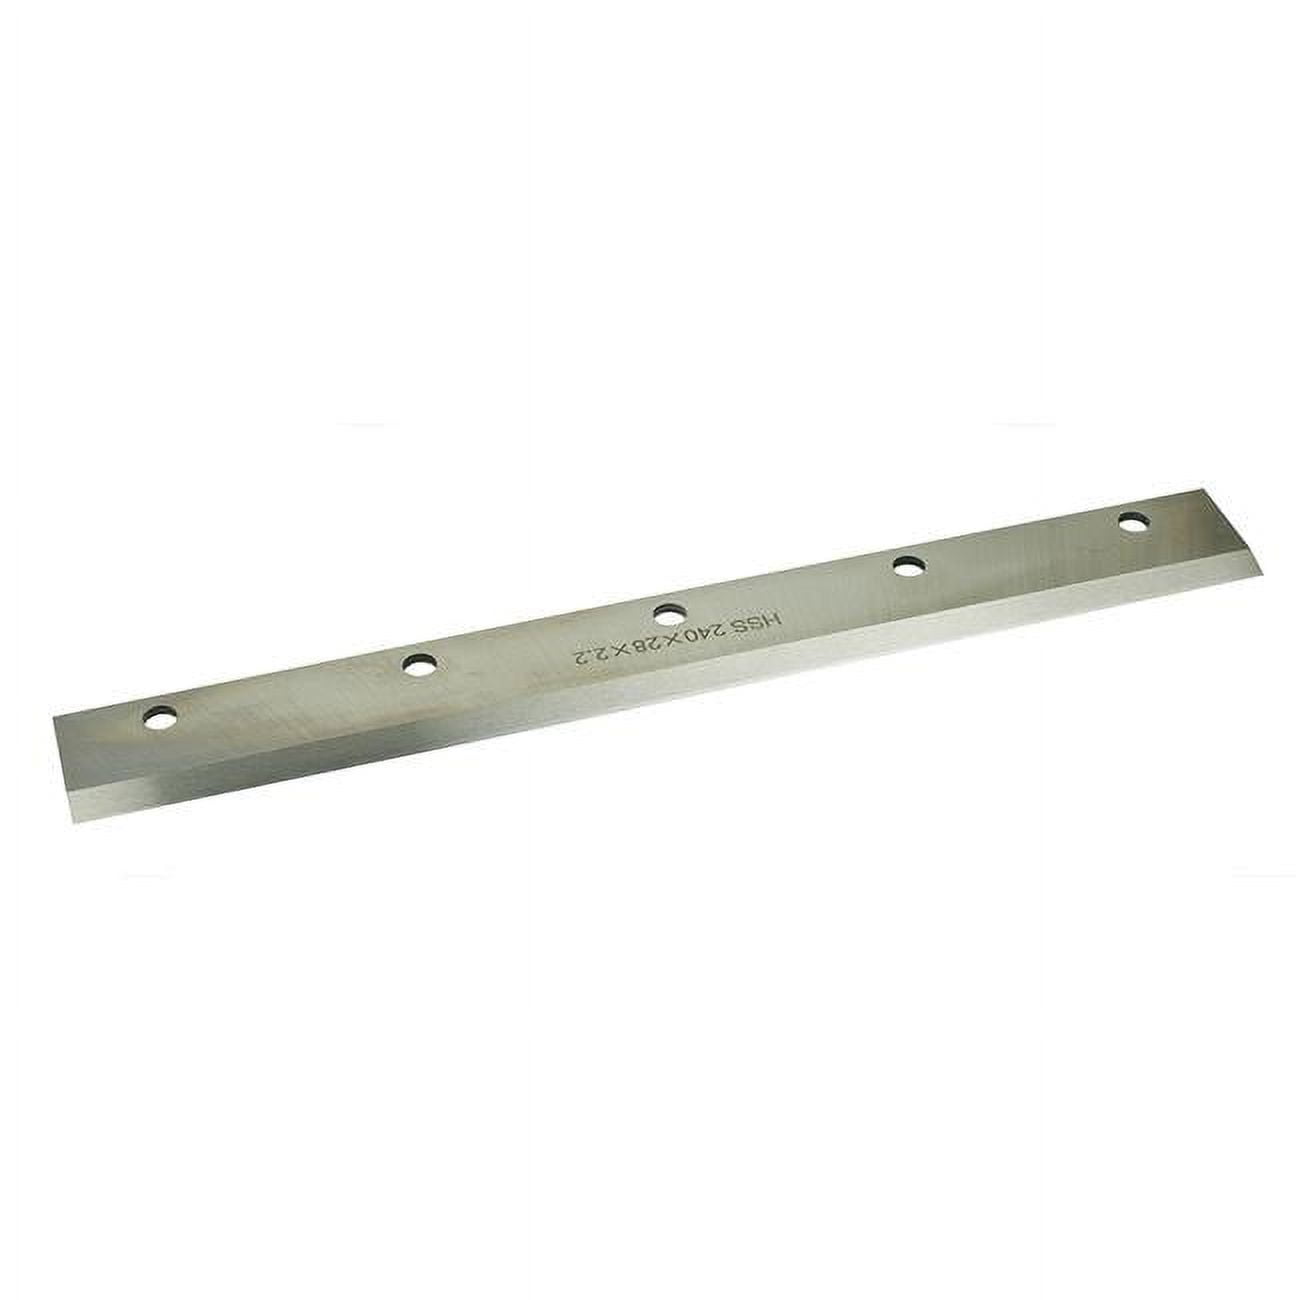 Picture of Stay Sharp 2100006 9 in. Flooring Cutter Replacement Blade - Recyclable